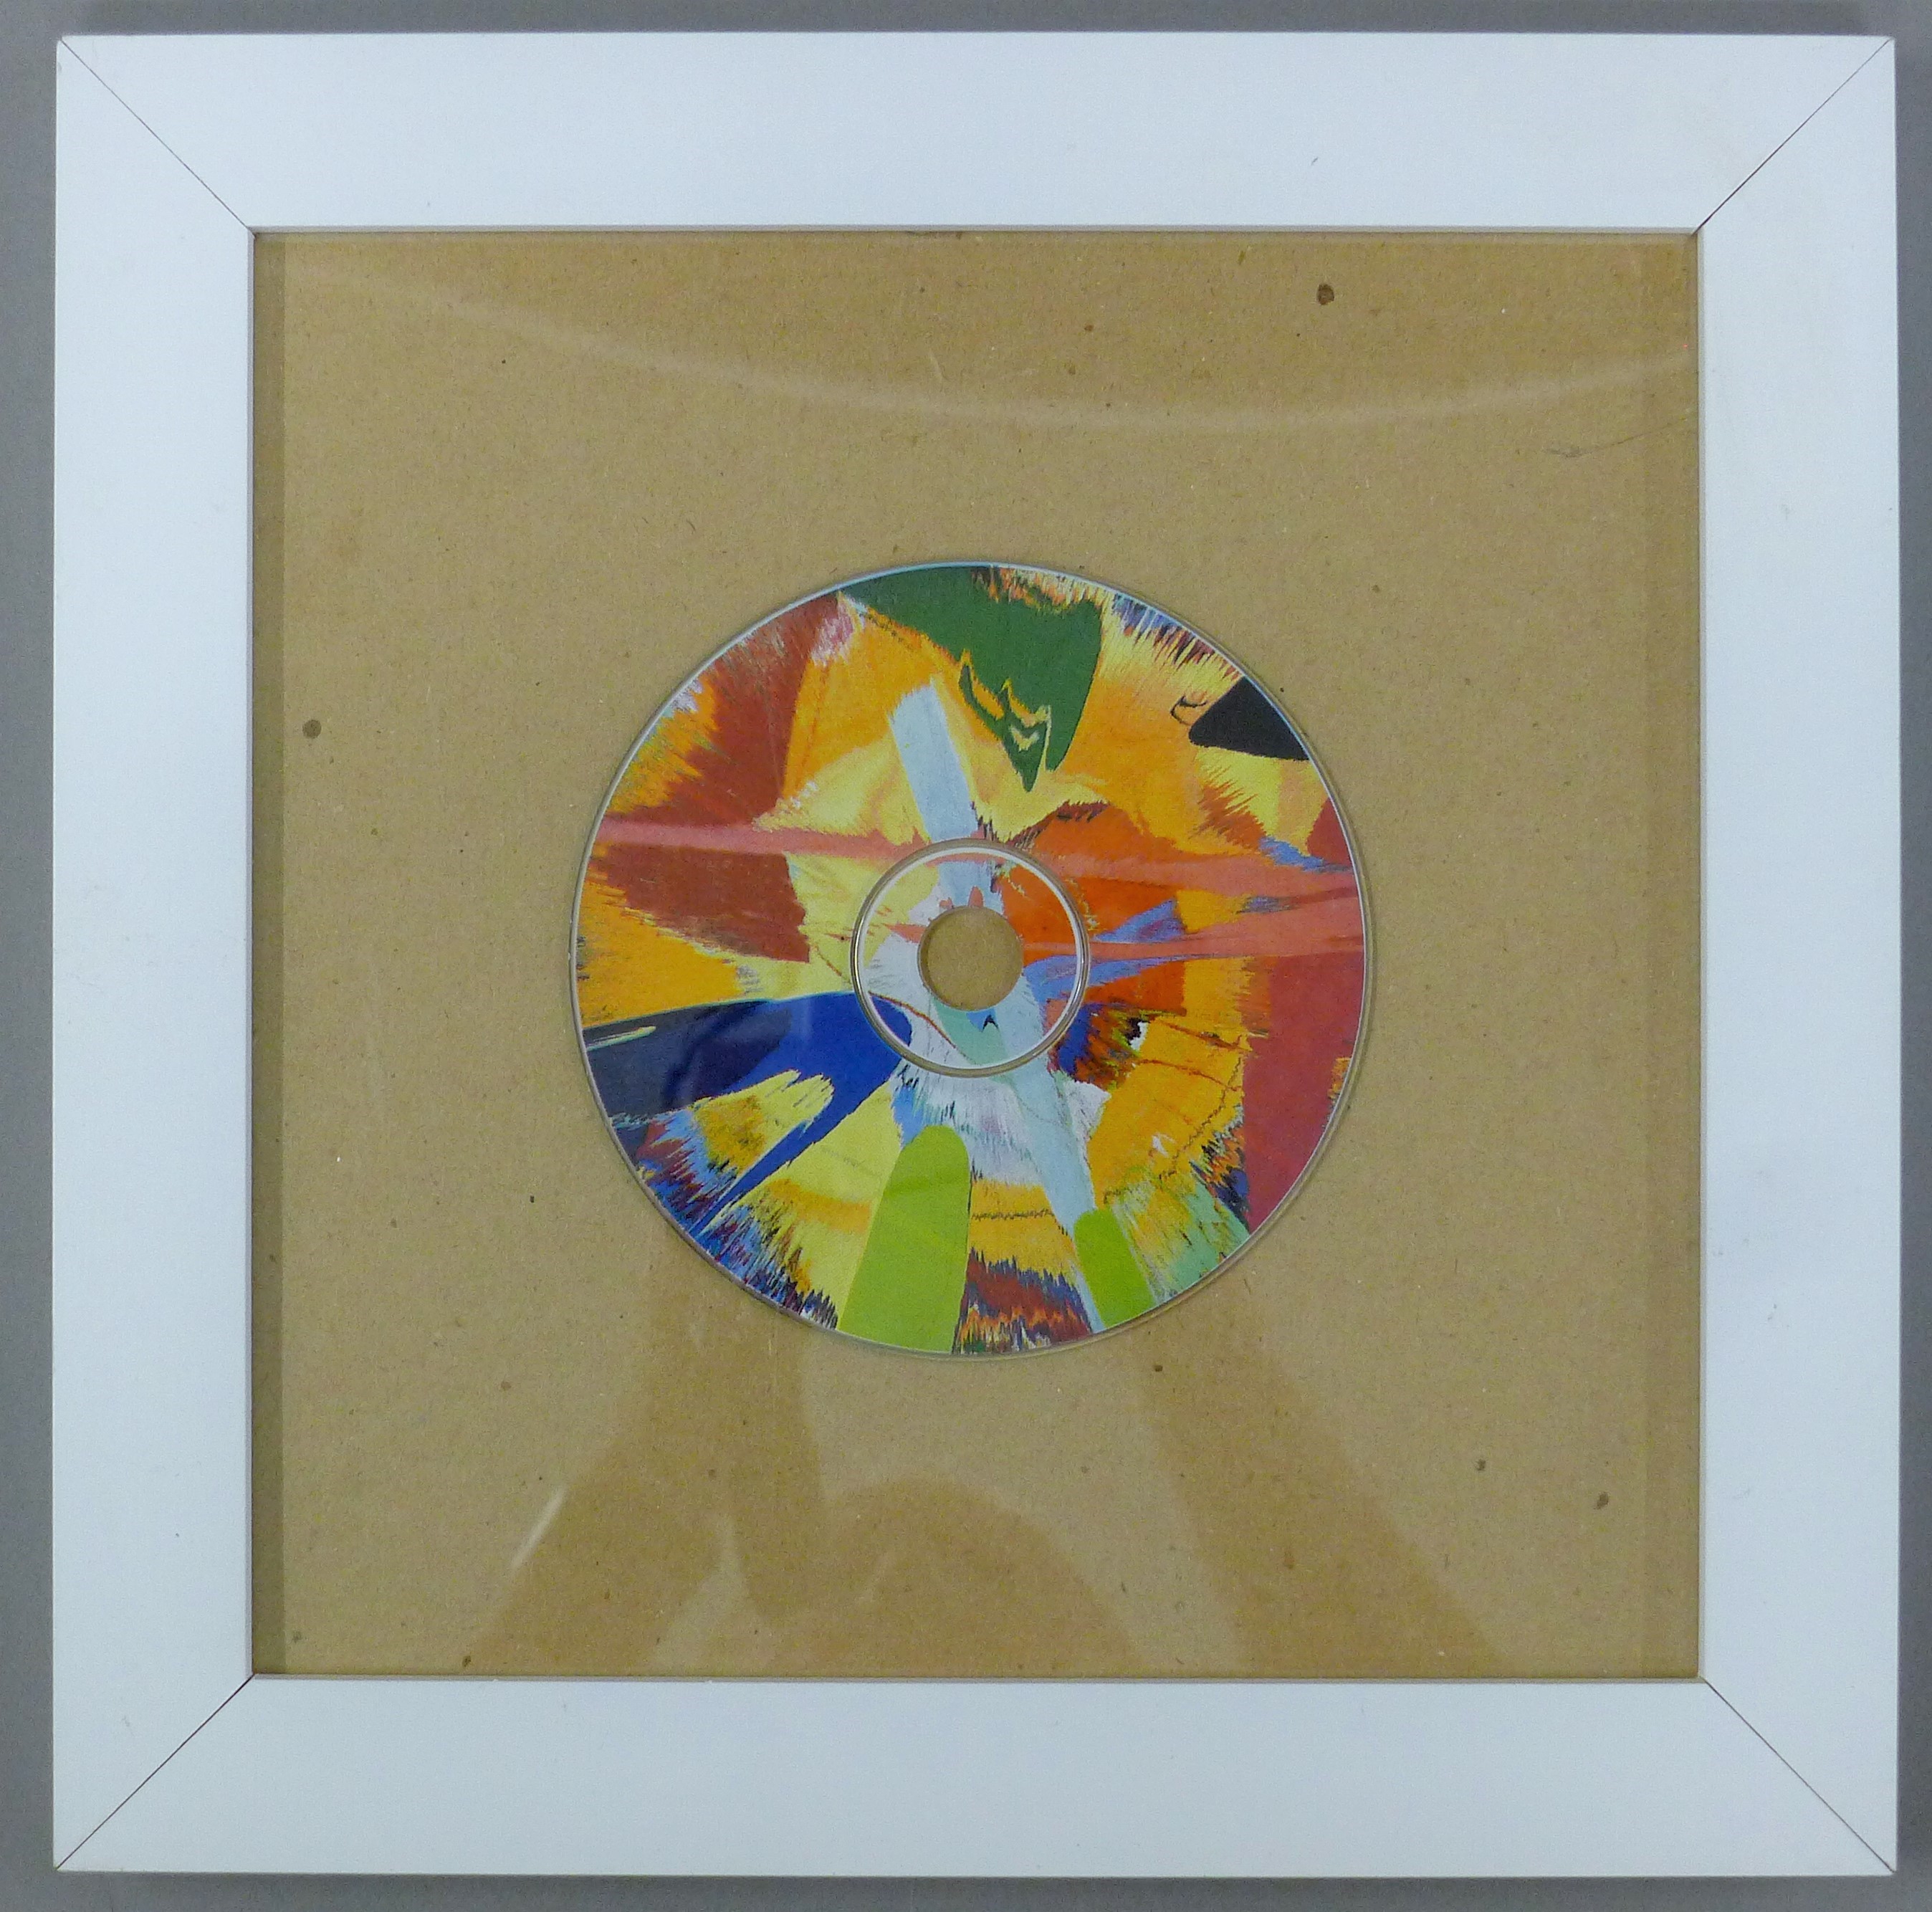 DAMIEN HIRST (born 1965) British (AR), a Spin CD, a limited edition of 10, - Image 2 of 2